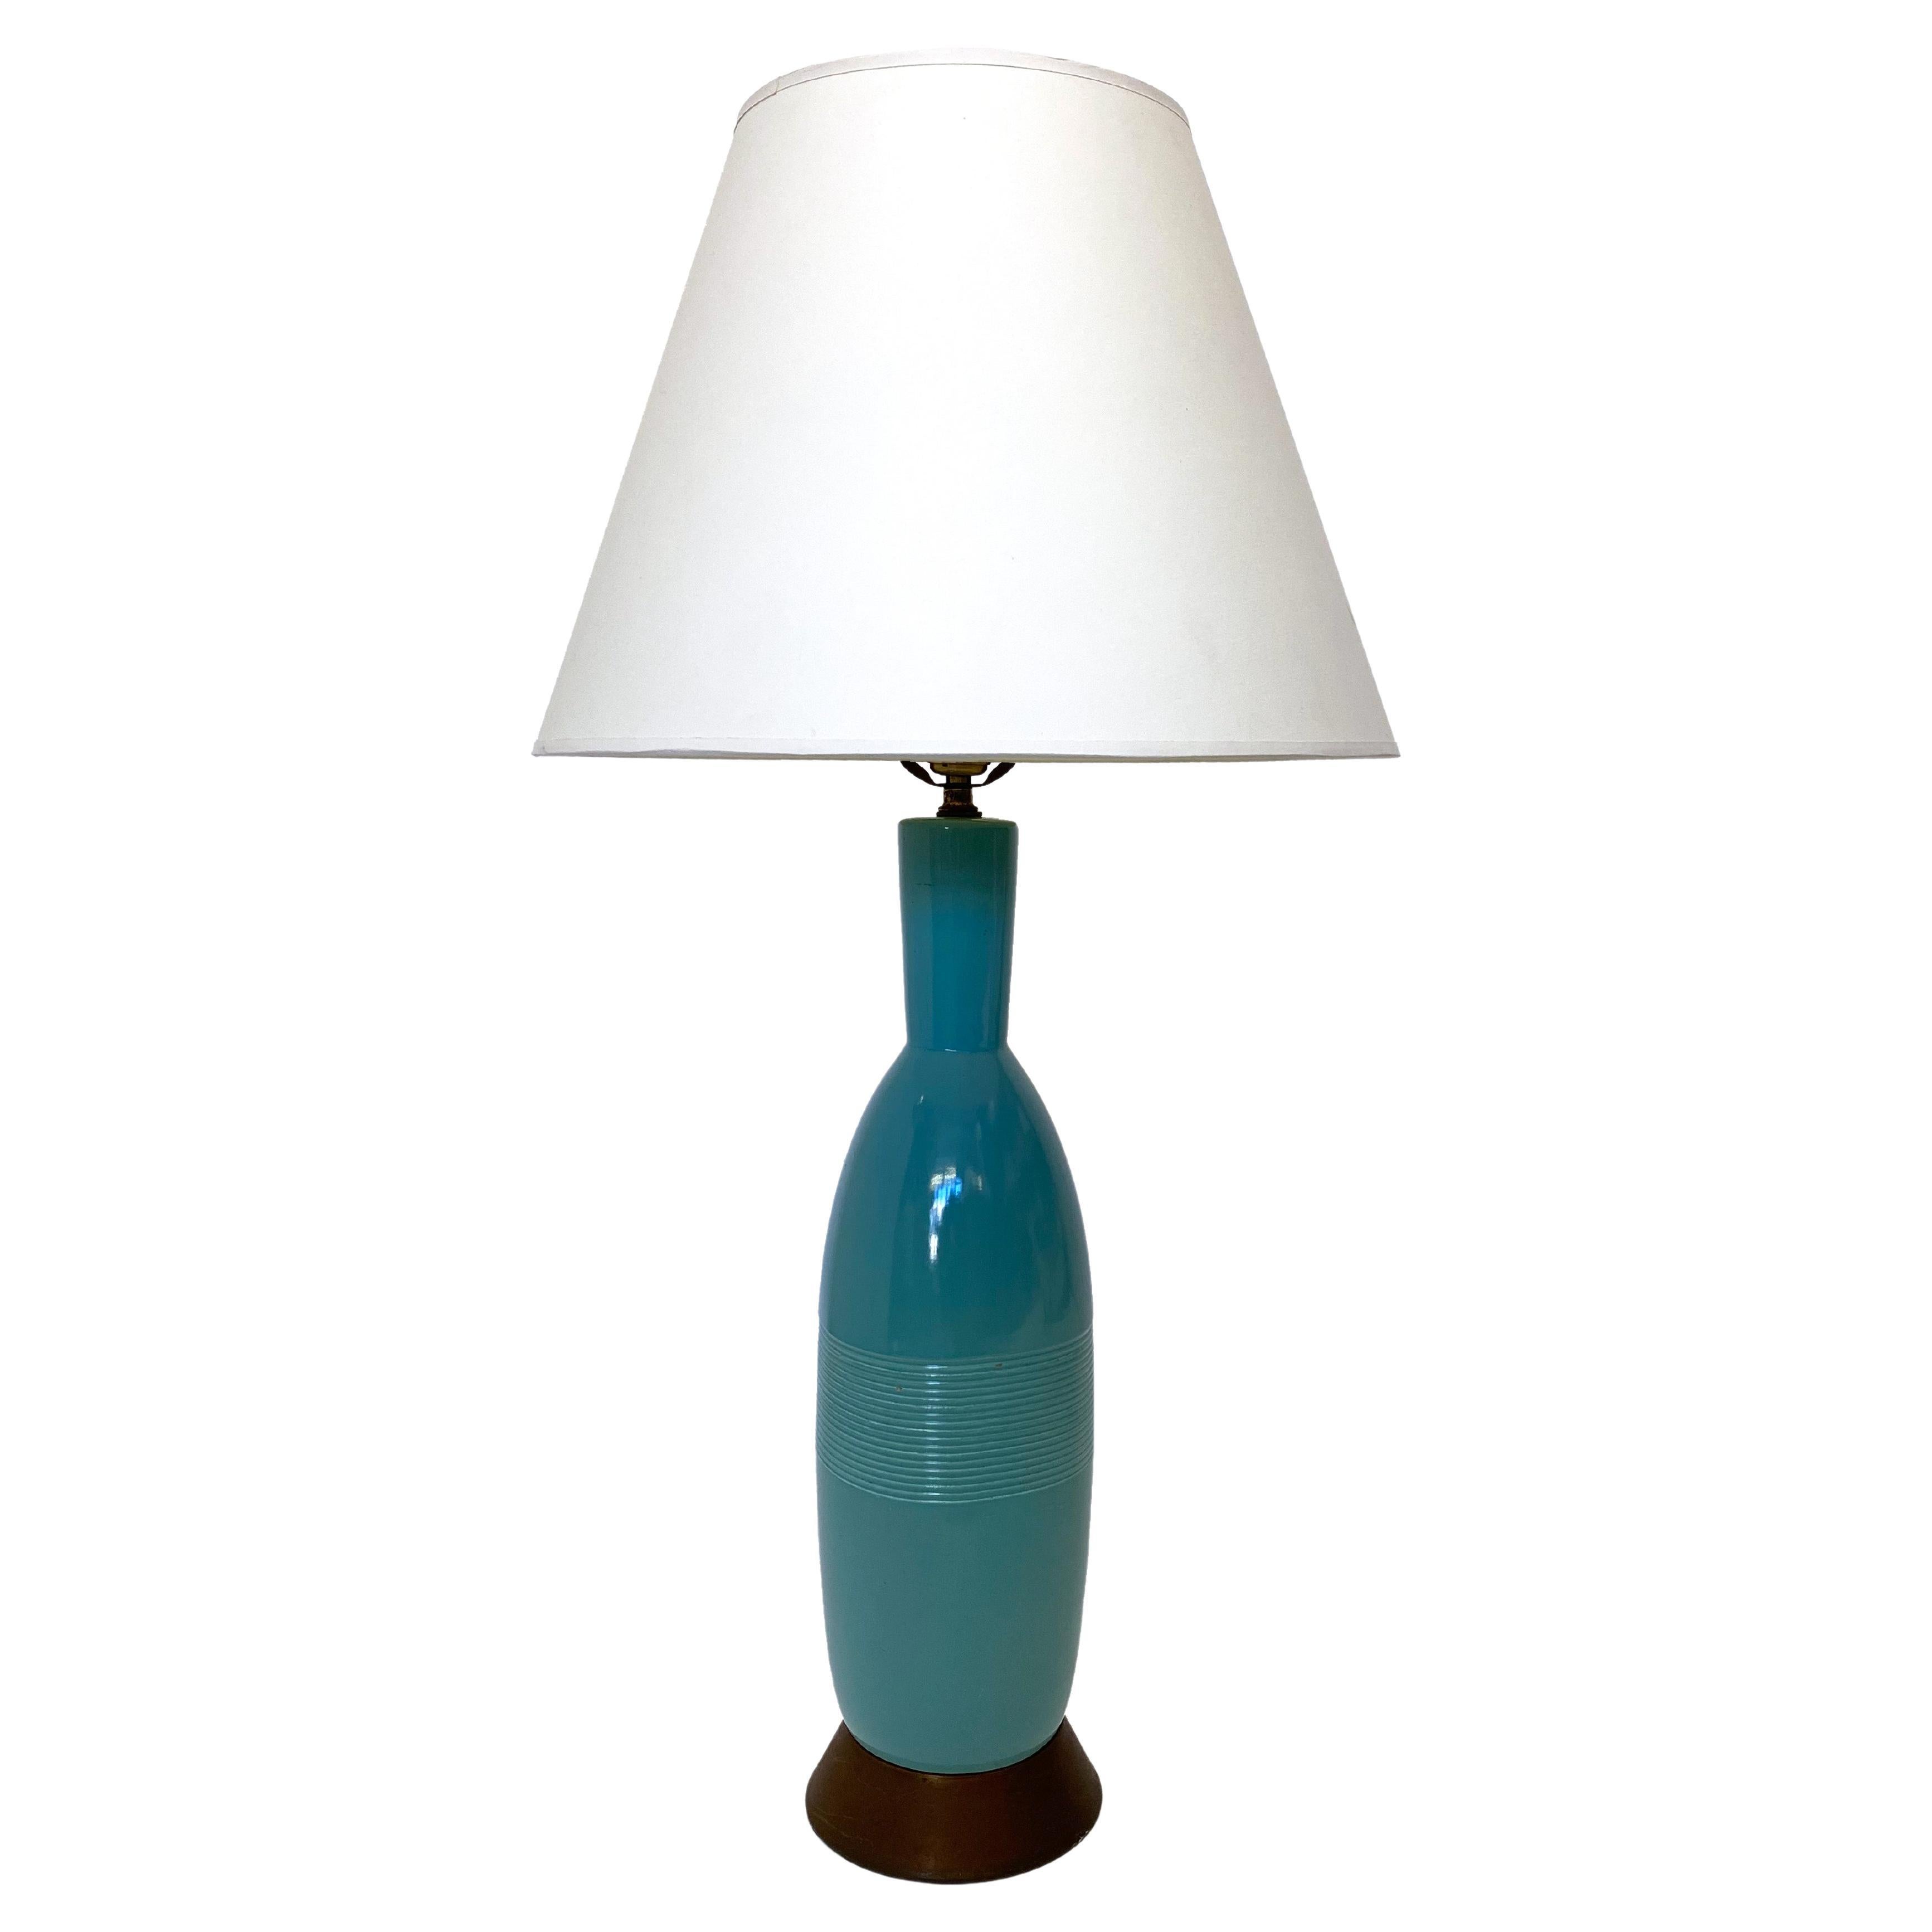 Blue ceramic table lamp with metal base. This ceramic piece has a unique bottle like shape that is enhanced with a striped pattern detail in the middle of the body. 

Property from esteemed interior designer Juan Montoya. Juan Montoya is one of